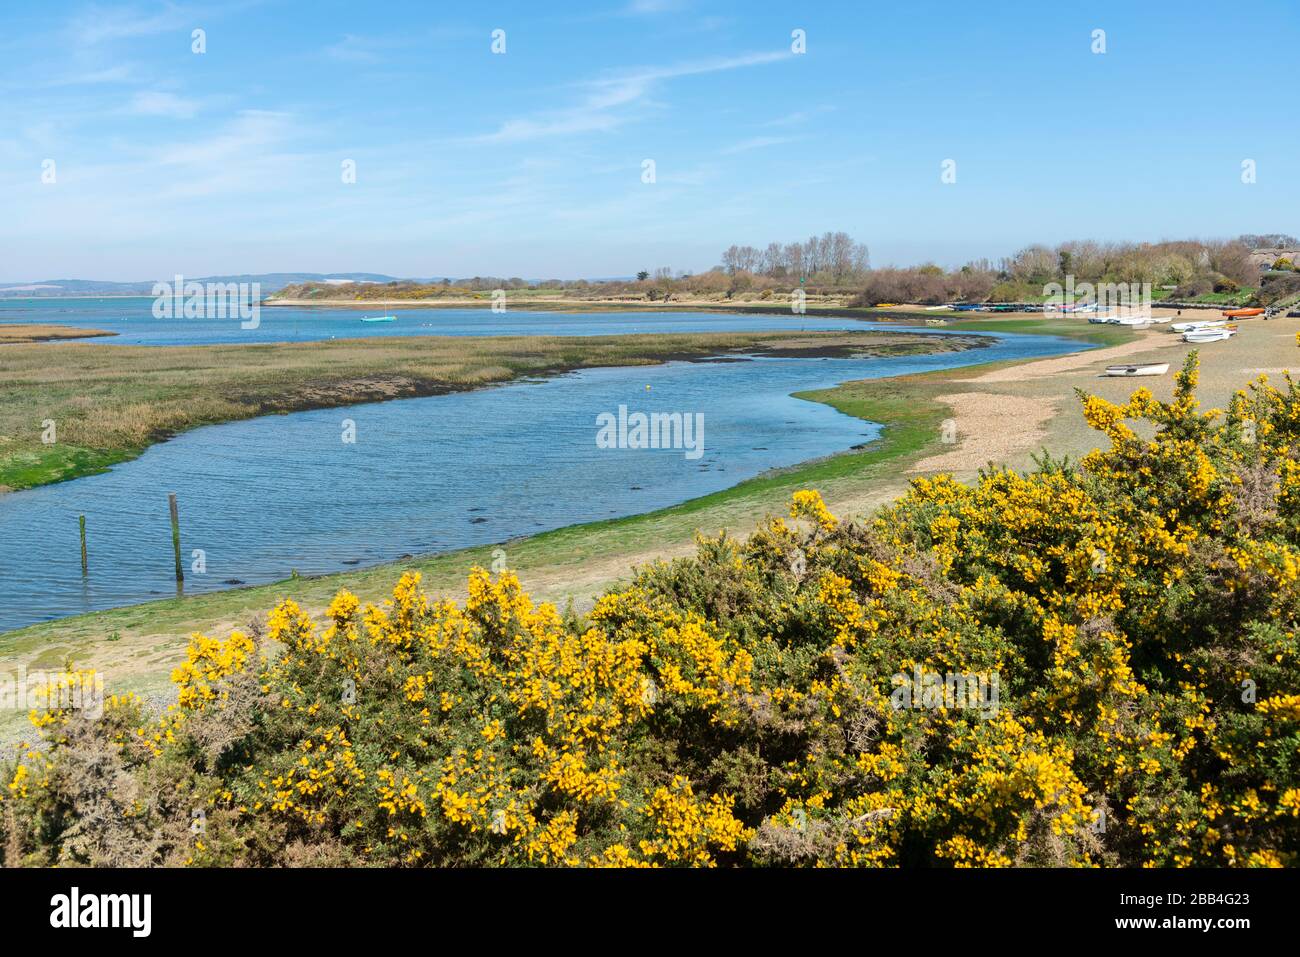 Yellow flowered gorse hedgerows line the banks of the tidal Snowhill Creek at West Wittering, Chichester Harbour, Chichester, West Sussex, England, UK Stock Photo